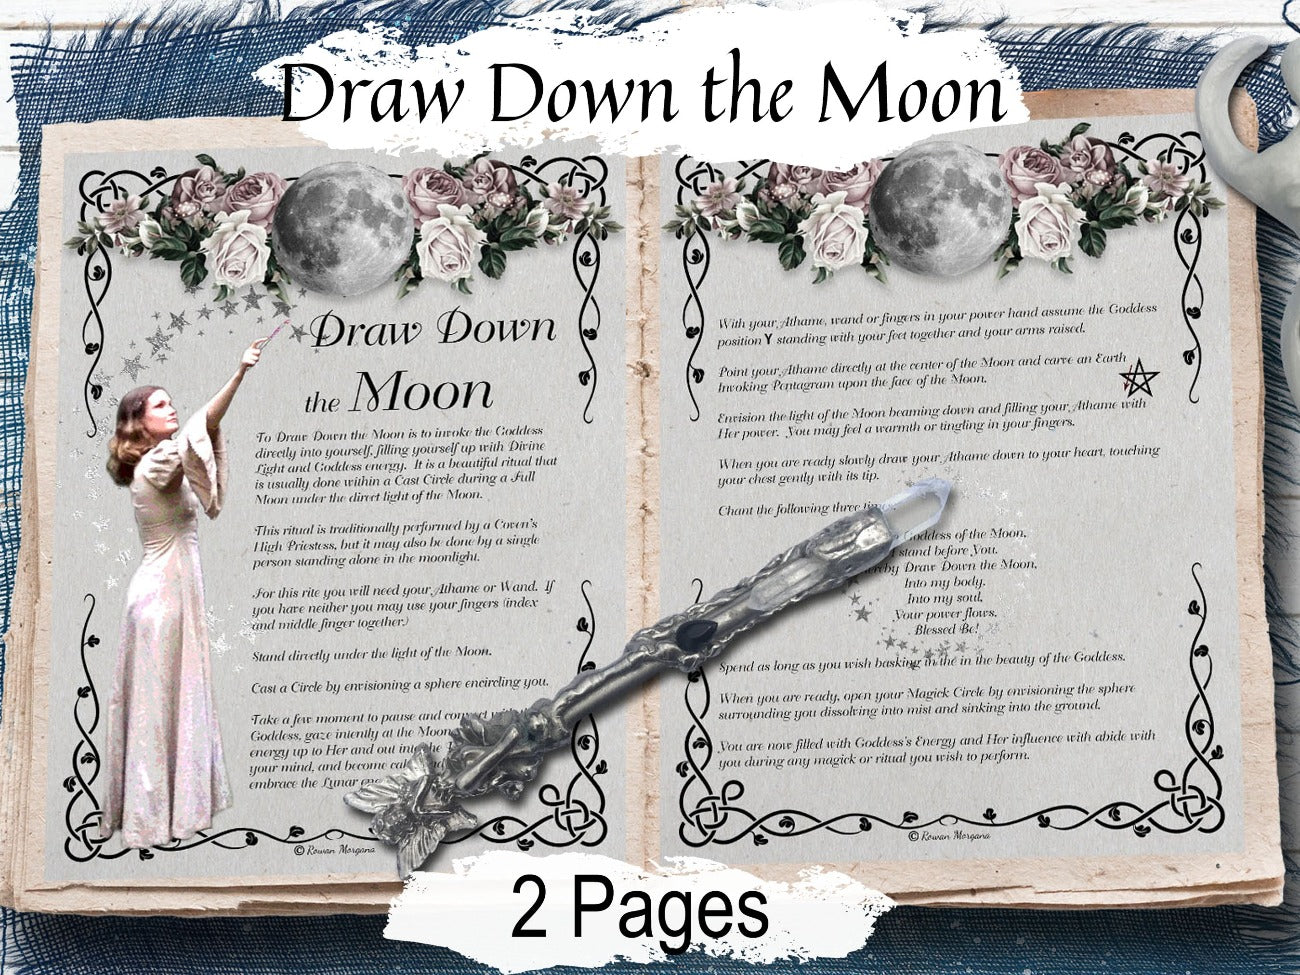 DRAW DOWN the MOON a Wicca Ritual, 2 Pages, Witchcraft Full Moon Magic, Moon Goddess, Moon Spell, Wicca Moon Esbat Prayer Meditation Ritual - Morgana Magick Spell